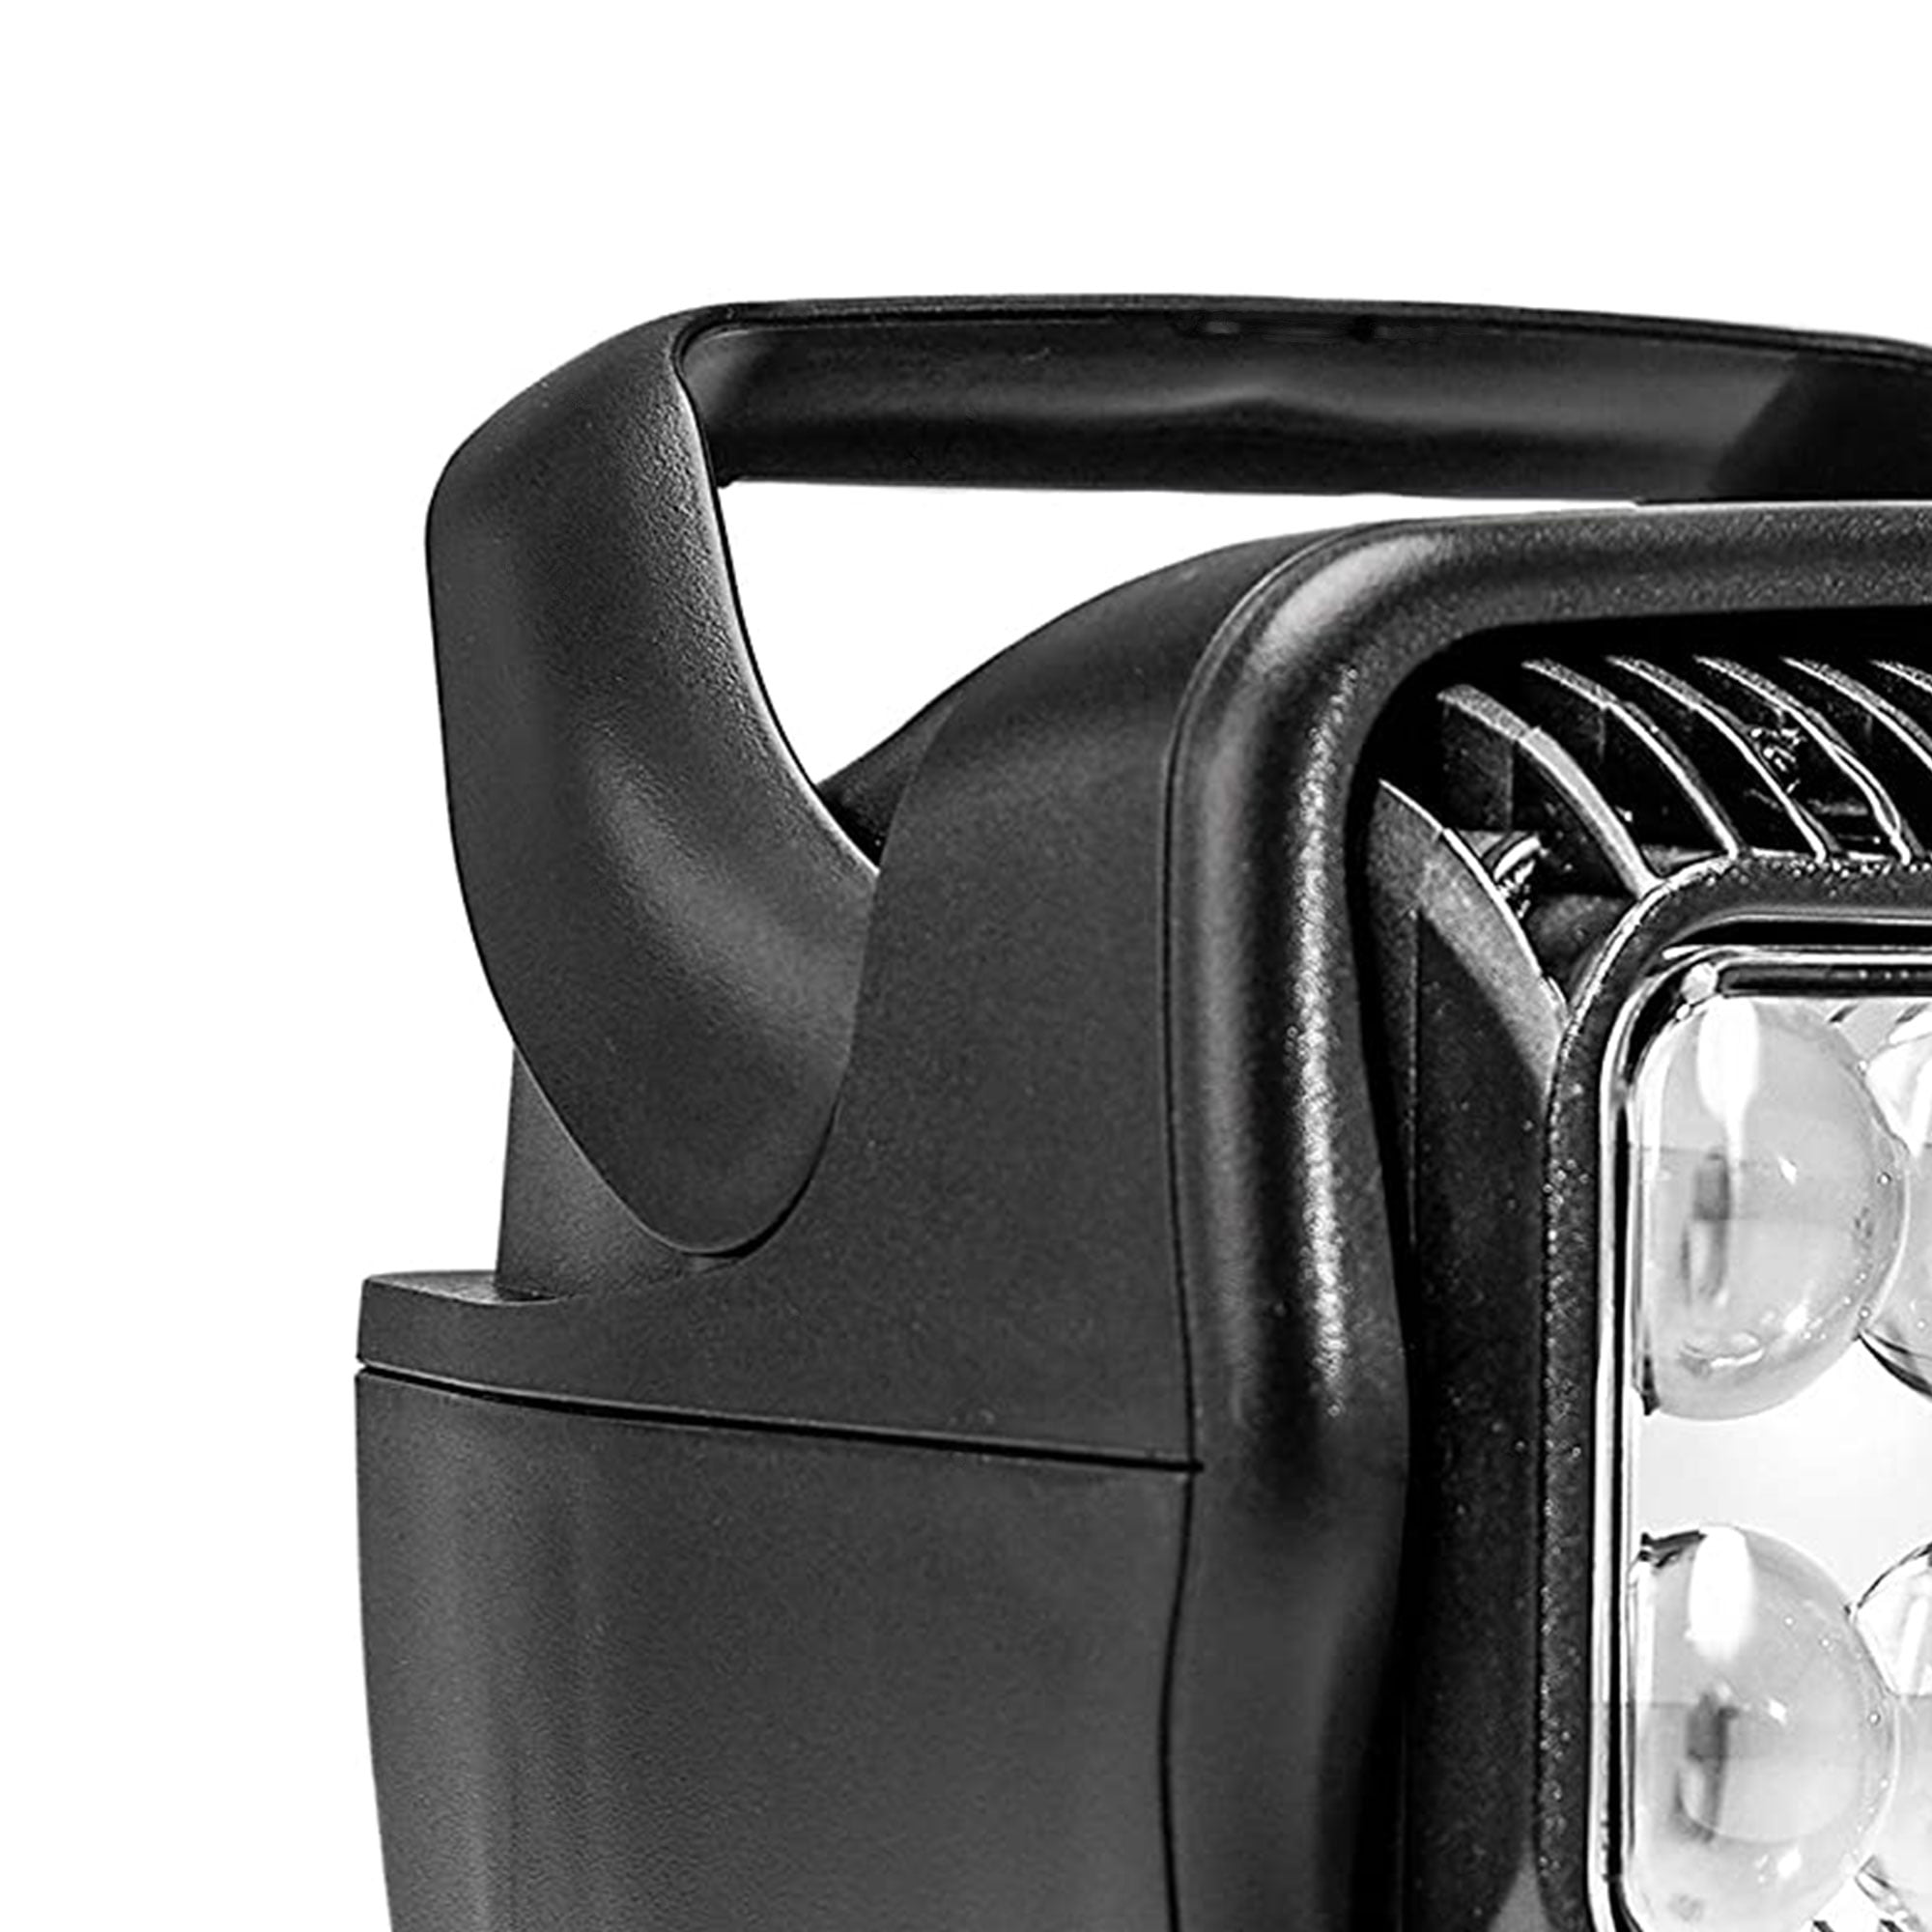 Golight / Radioray Halogen Suction Cup & Permanent Mount Shoe / Charcoal / Handheld Wired Remote